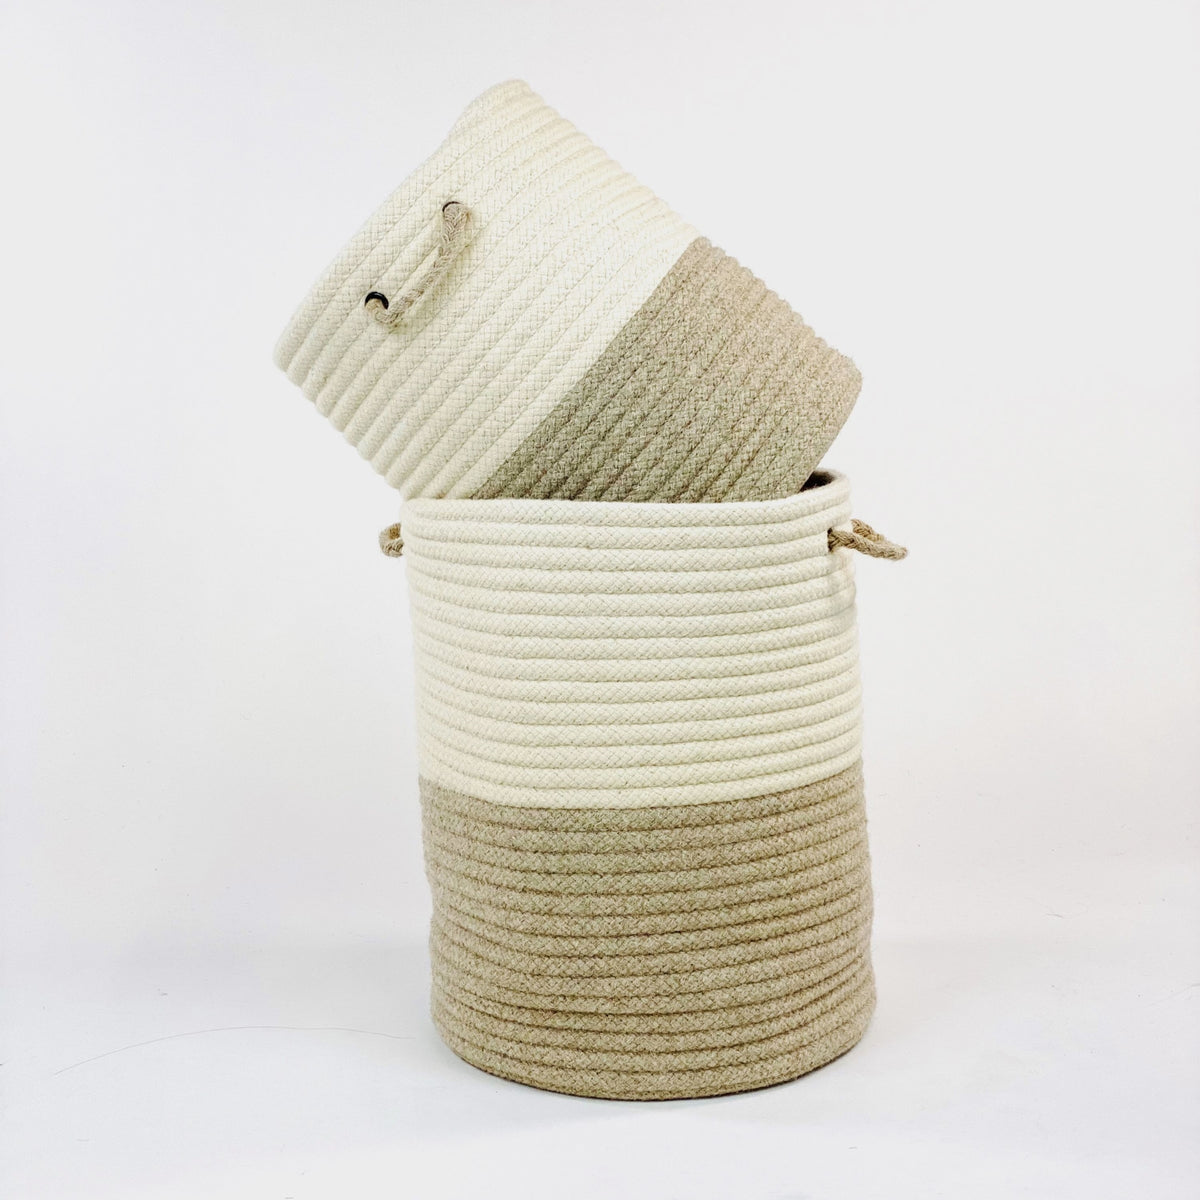 Laundry Hamper Baskets Two-Tone Ligth Grey Braided Natural Wool Made in USA